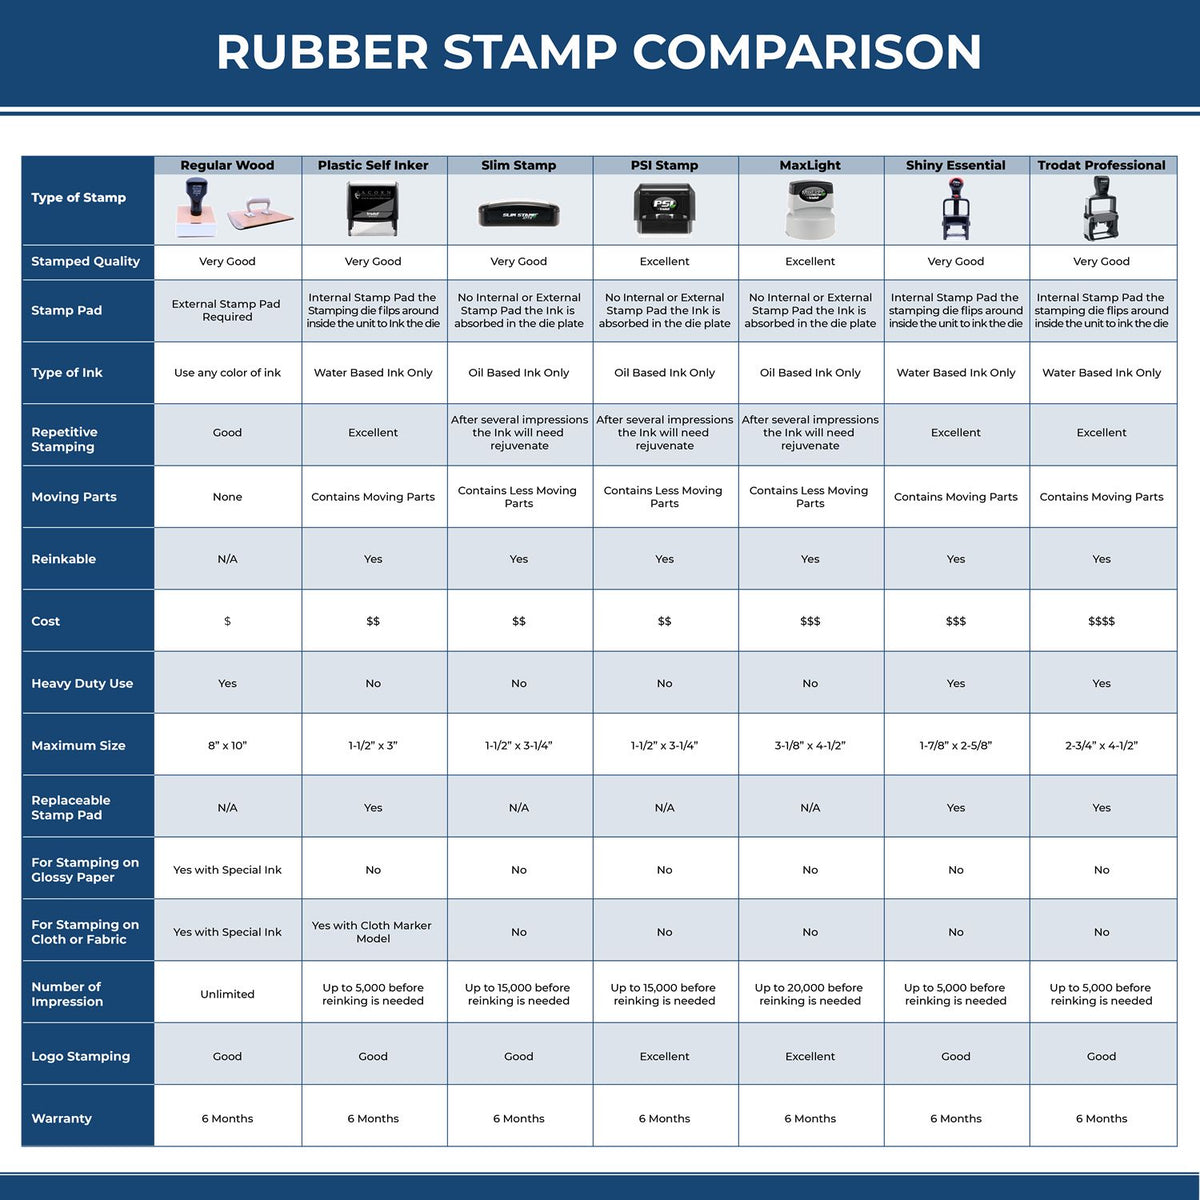 Large Good Rubber Stamp 4660R Rubber Stamp Comparison